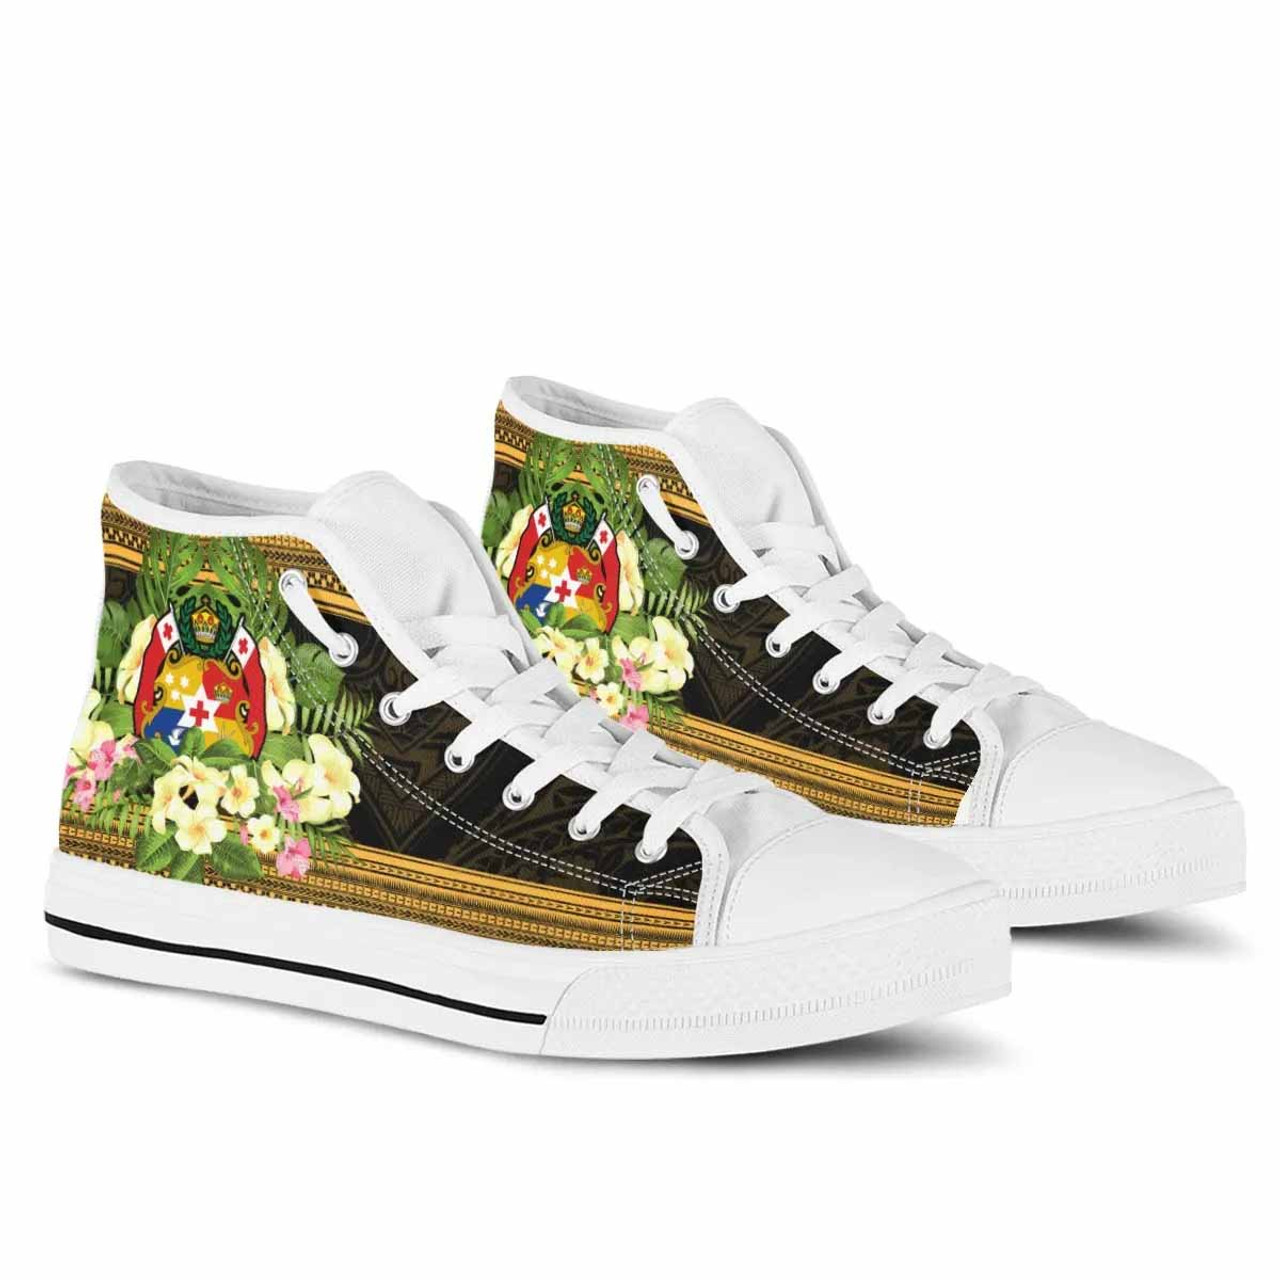 Tonga High Top Shoes - Polynesian Gold Patterns Collection 8